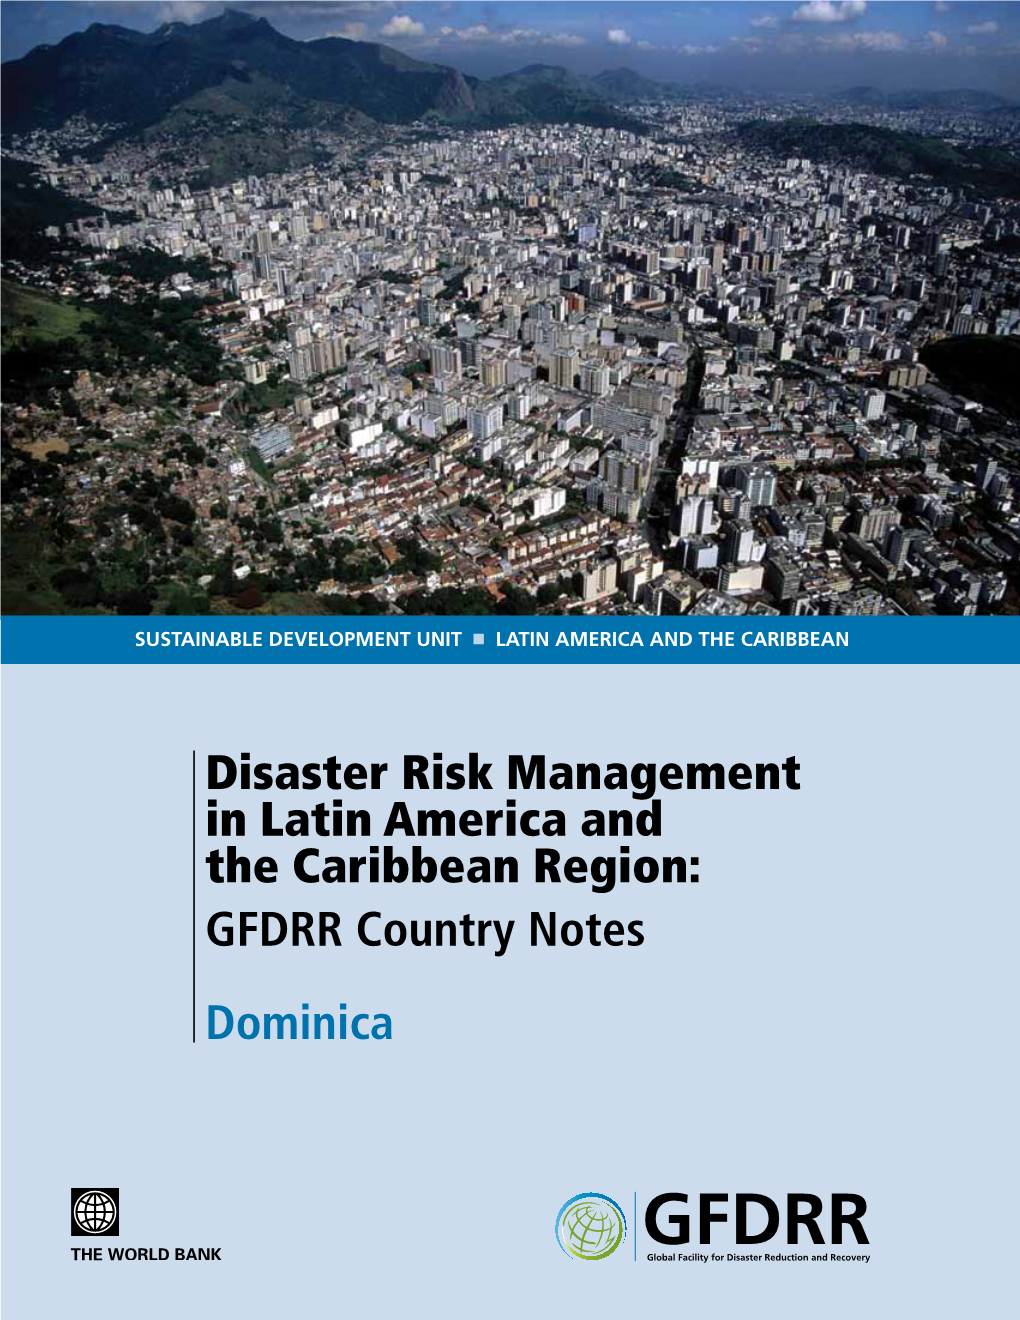 GFDRR Country Notes Dominica DOMINICA